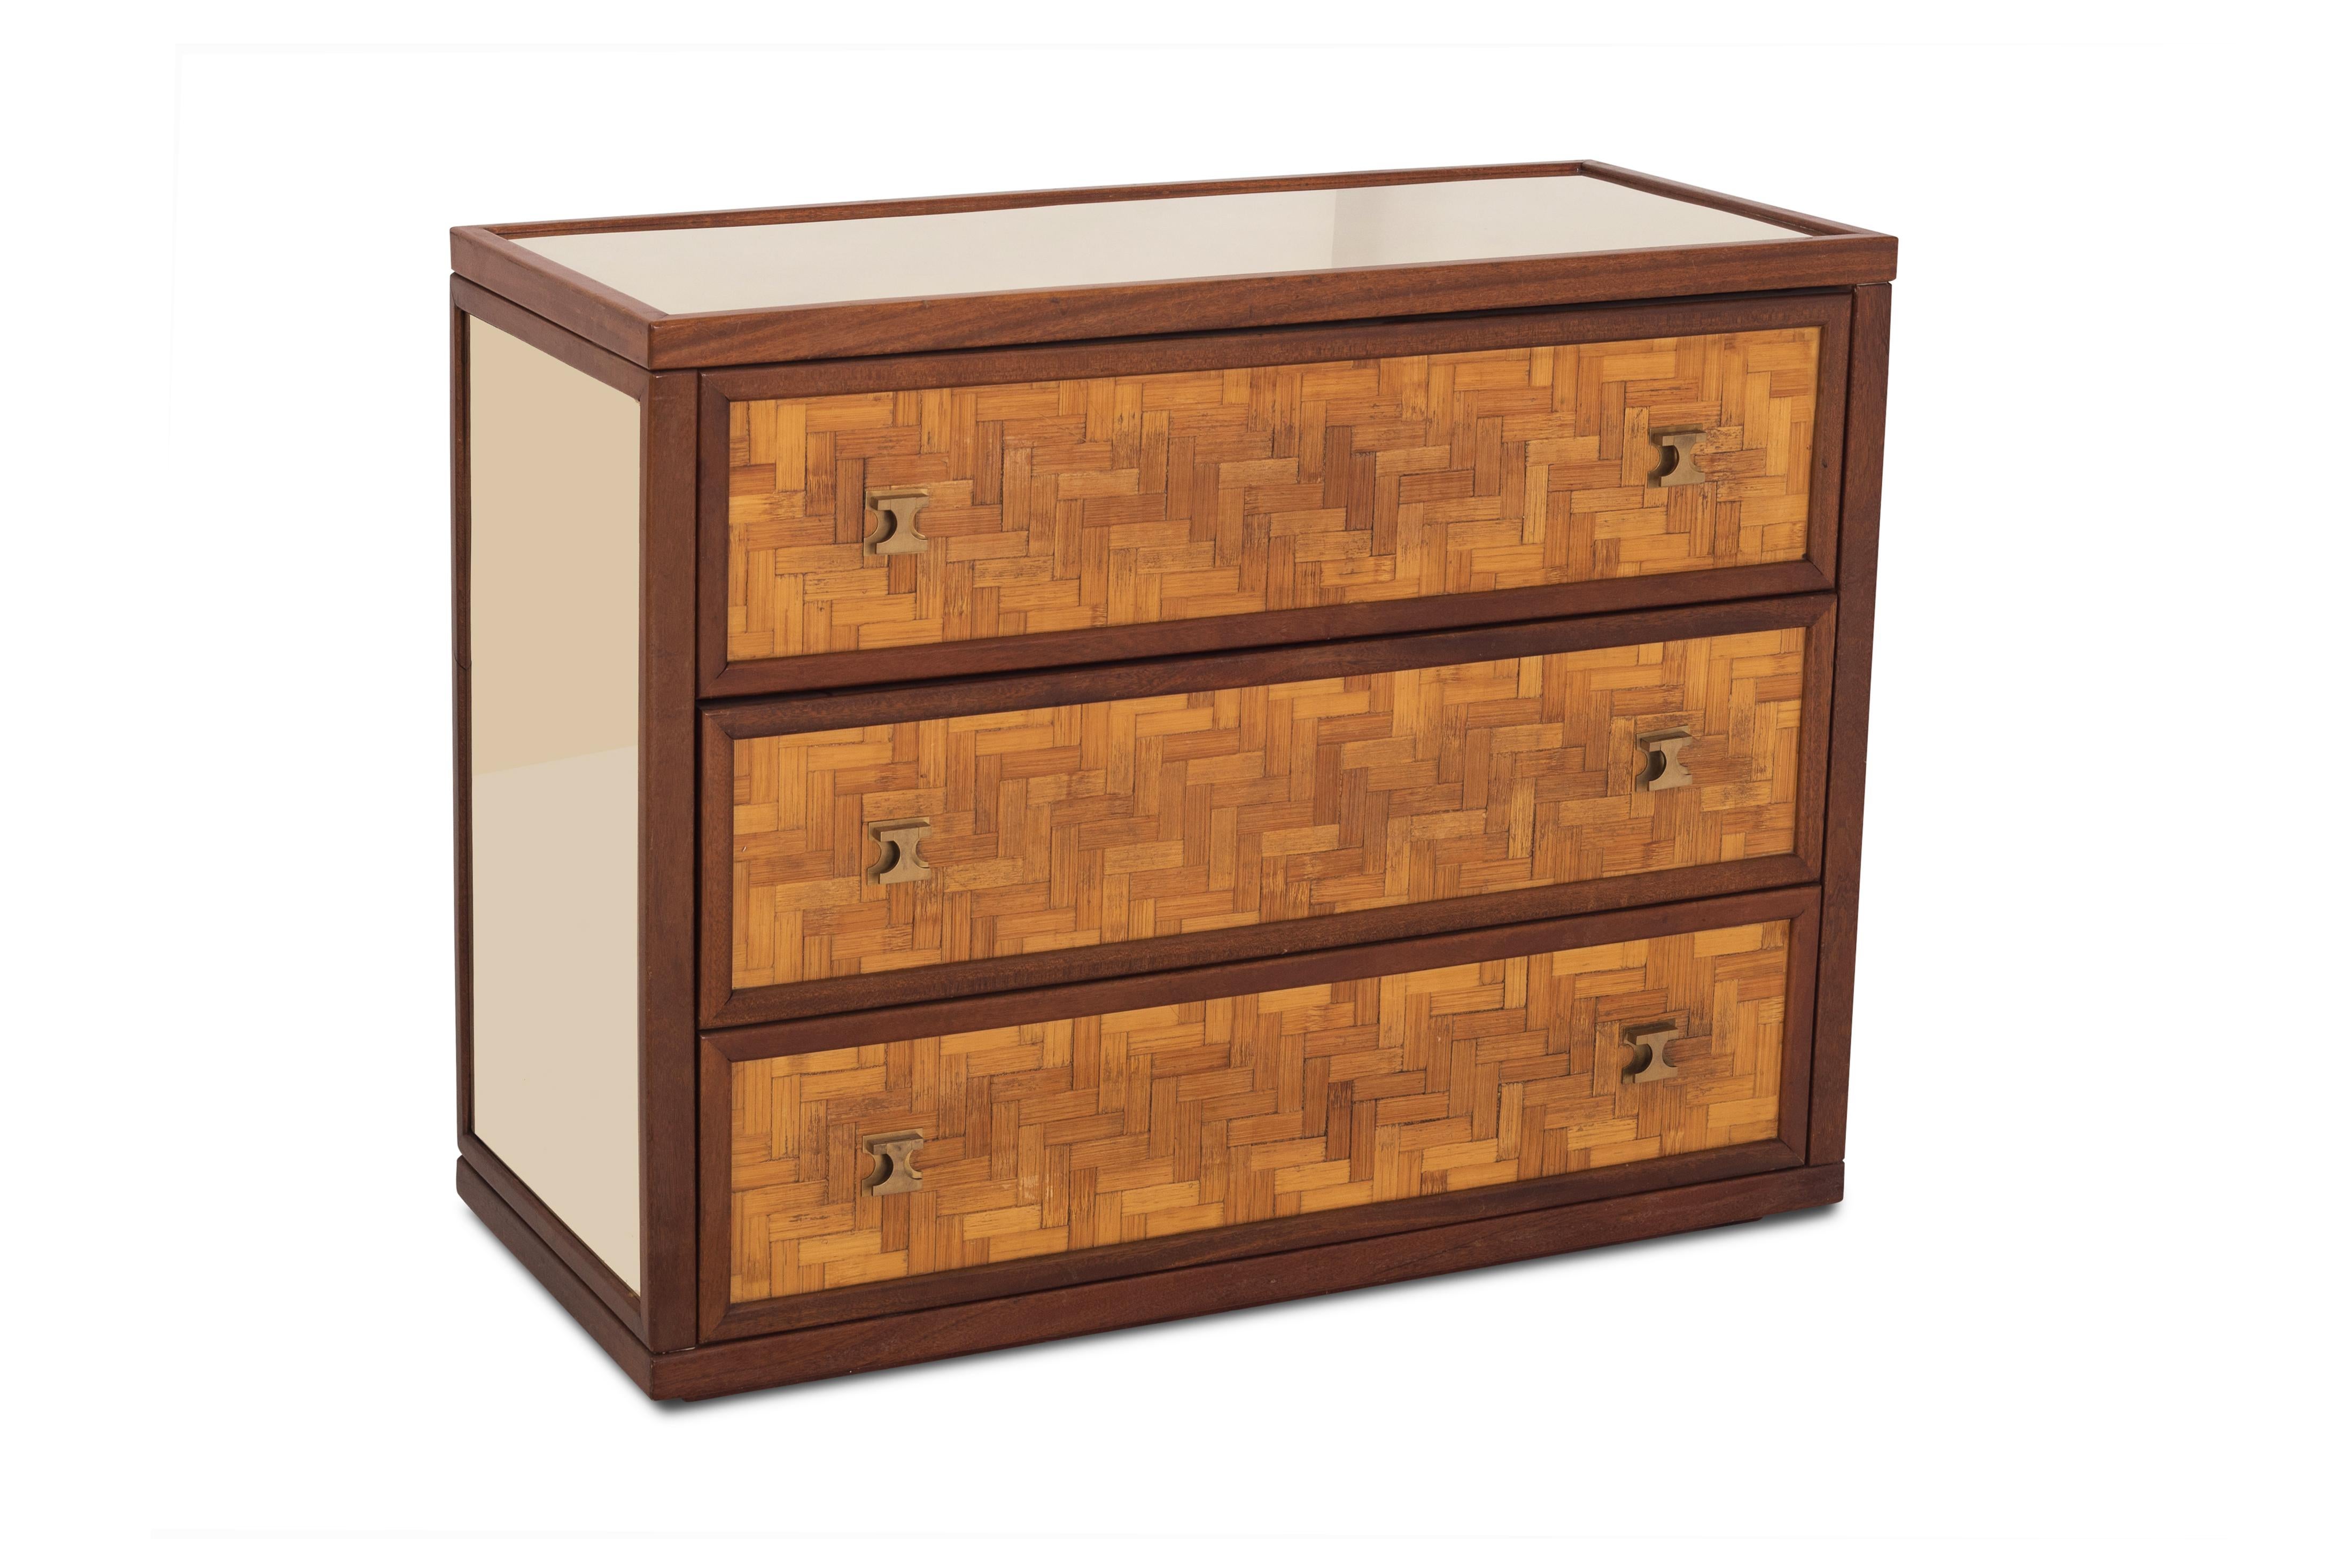 Teak sideboard in the style of Harvey Probber with reflecting brass side panels and top, equipped with three large rattan cladded drawers, providing plenty of storage space. The cabinet is finished with elegant brass handles.